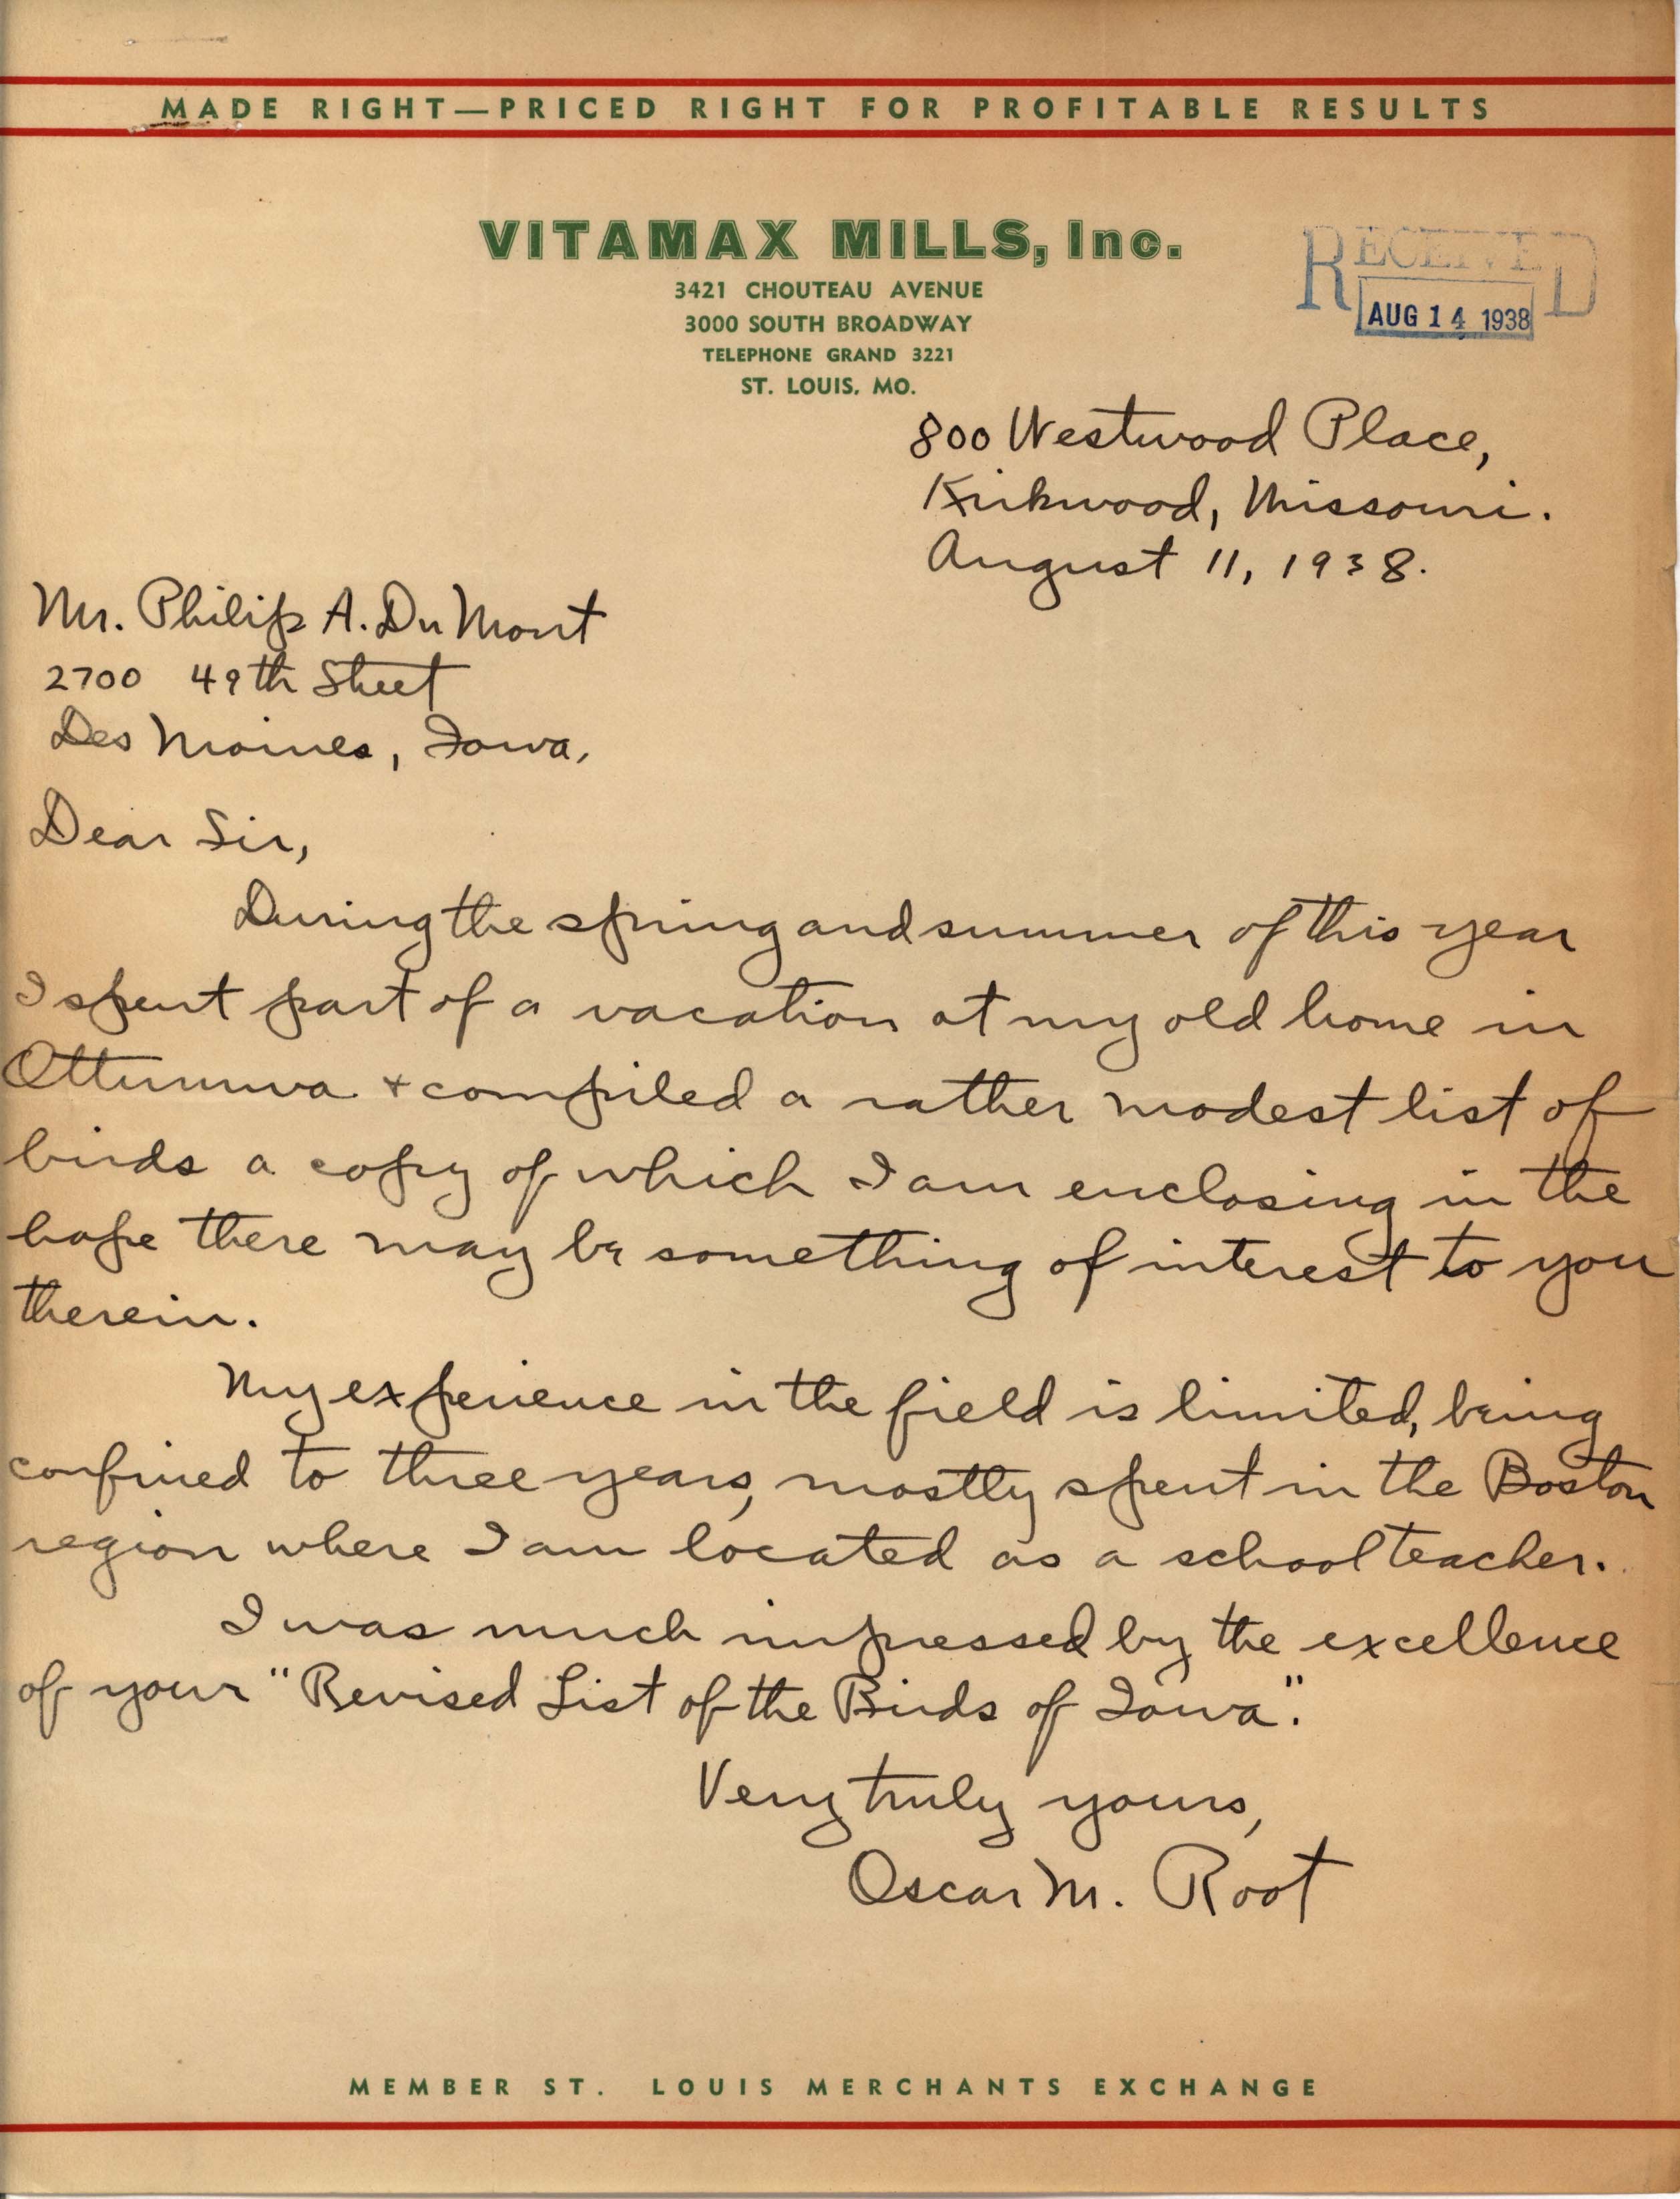 Oscar Root letter to Philip DuMont regarding birds sighted in Iowa, August 11, 1938